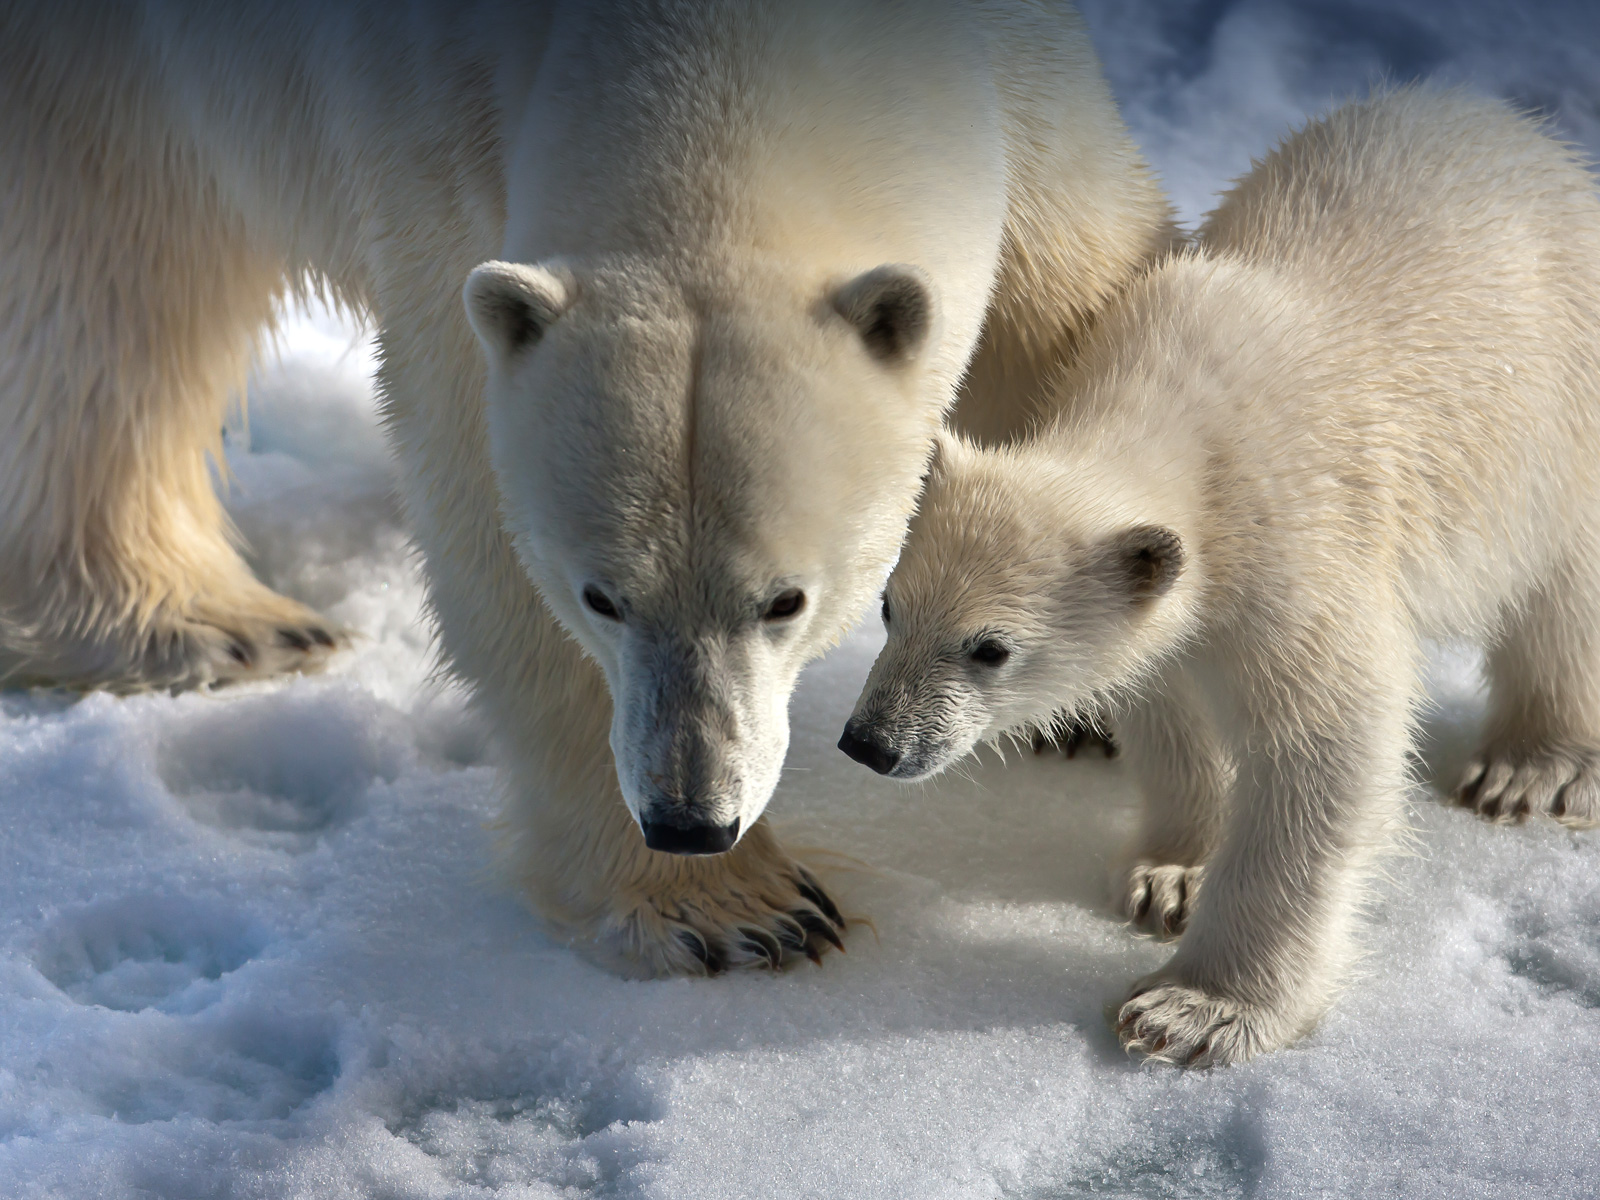 A female polar bear teaches her cub important Arctic survival skills in its first months out of the den